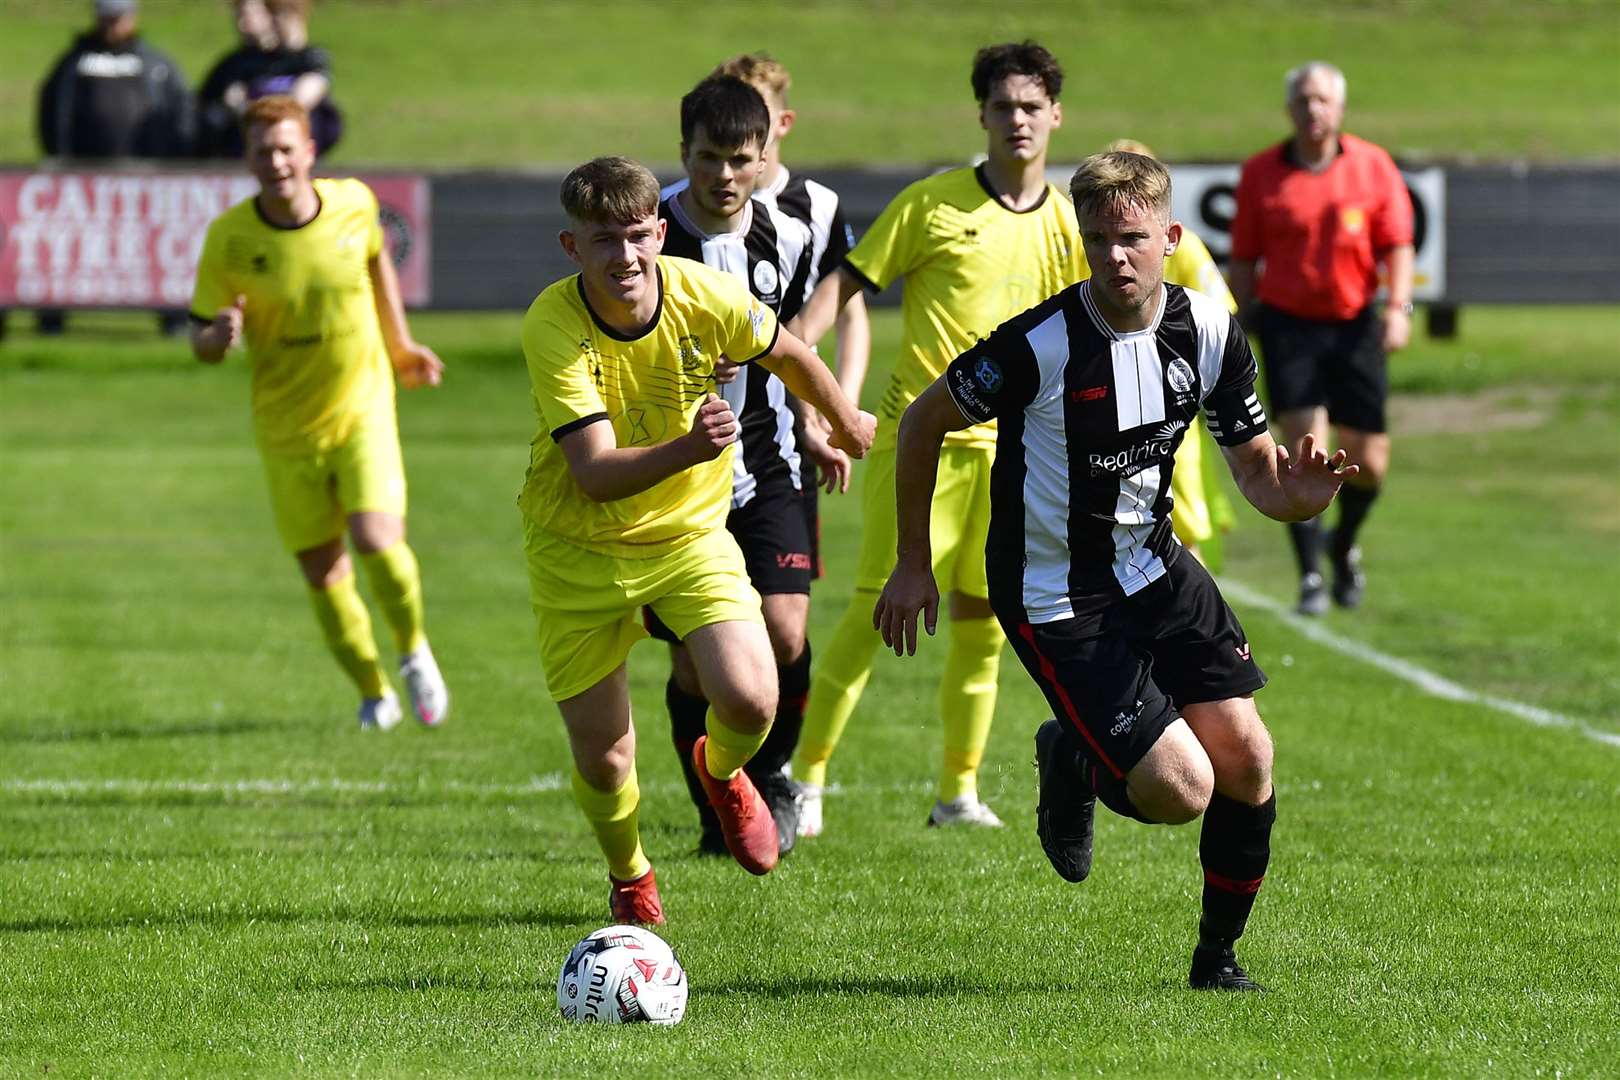 Alan Farquhar is chased by James Anderson during Wick Academy's 2-2 draw with Clachnacuddin at Harmsworth Park in August – this was Farquhar's last full game before injuring his right knee at Lossiemouth the following Saturday. Picture: Mel Roger